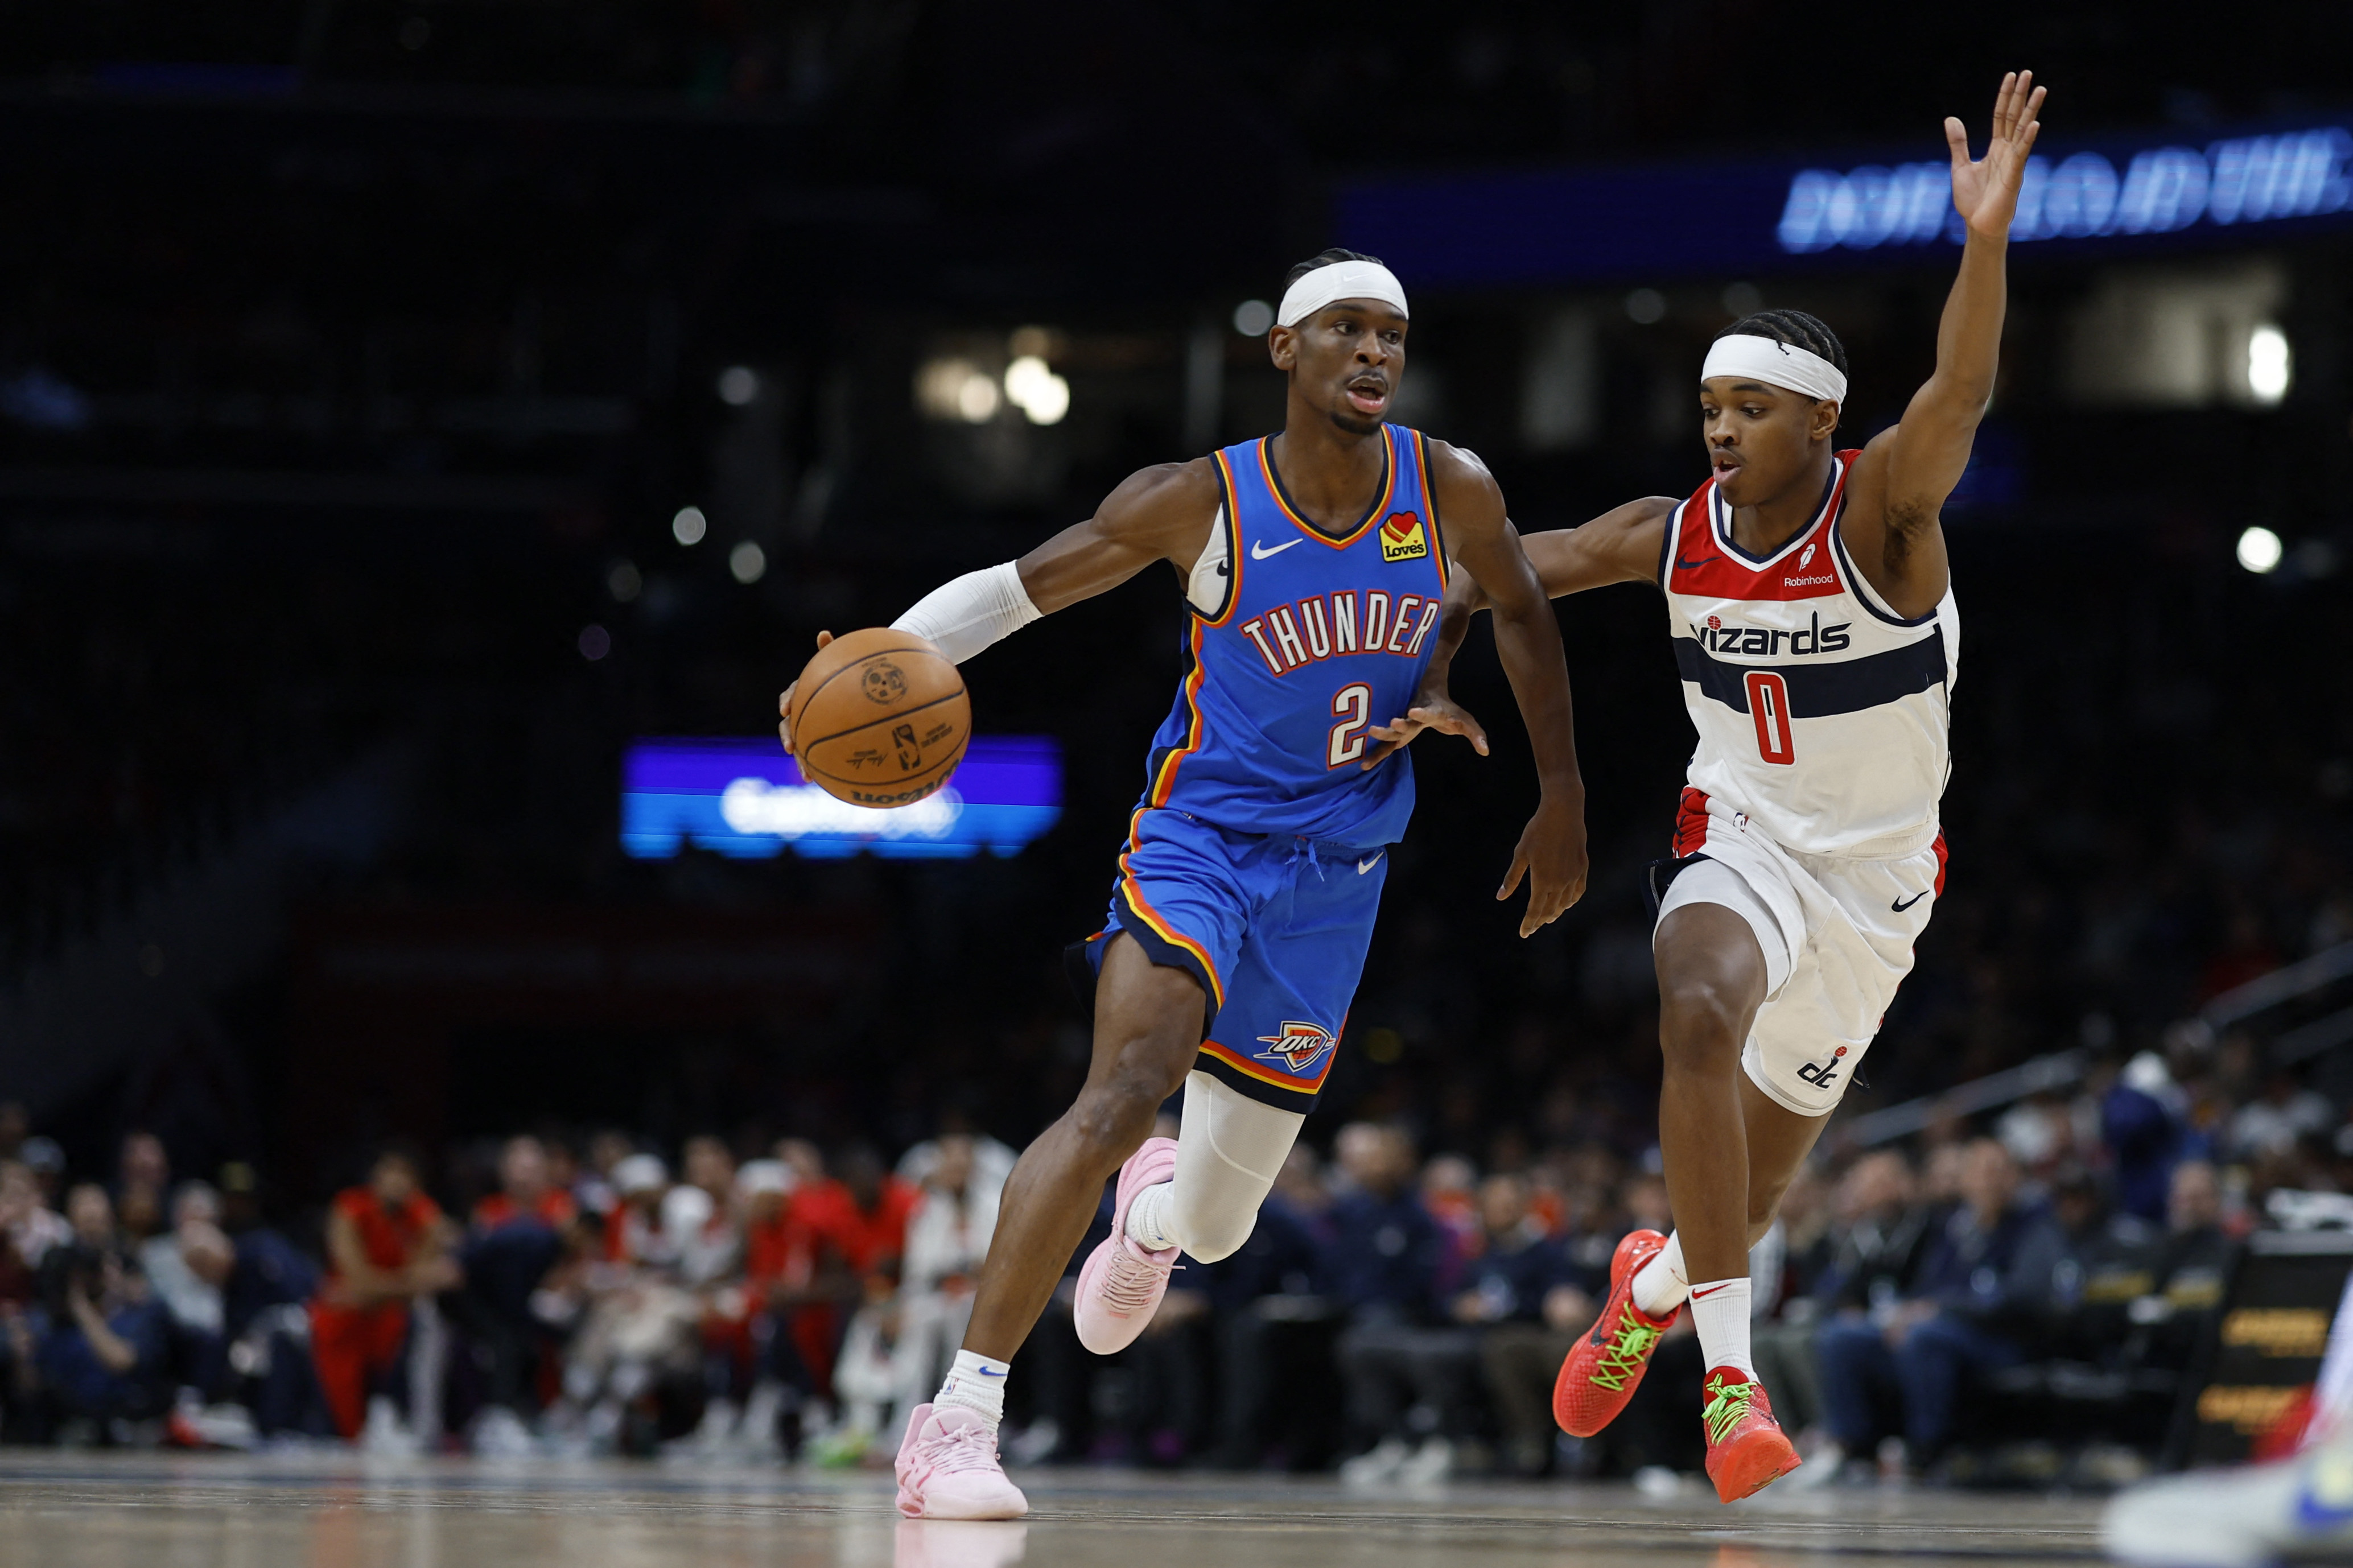 Despite free-throw woes, Thunder get past Wizards | Reuters